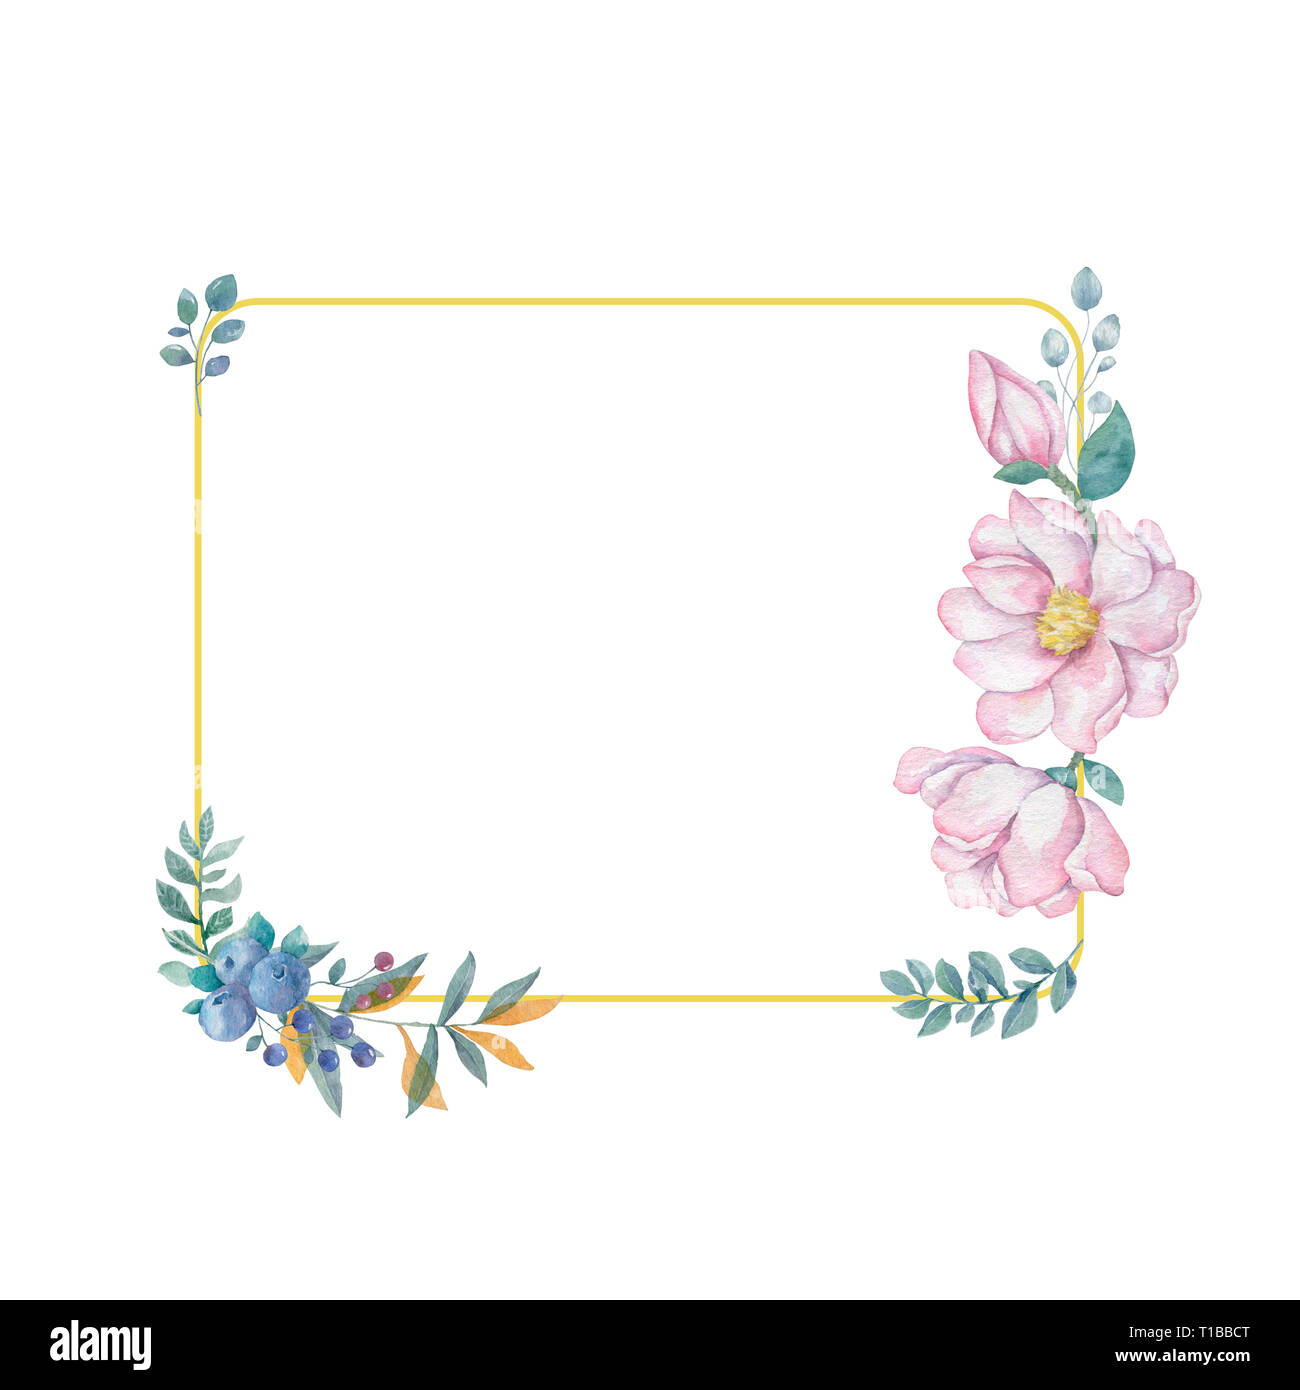 Watercolor Flowers And Leaves Wreath. Gold Frame Illustration. Square Clip Art Branch For Celebration, Widding, Invite Card White Background Vintage S Stock Photo - Alamy